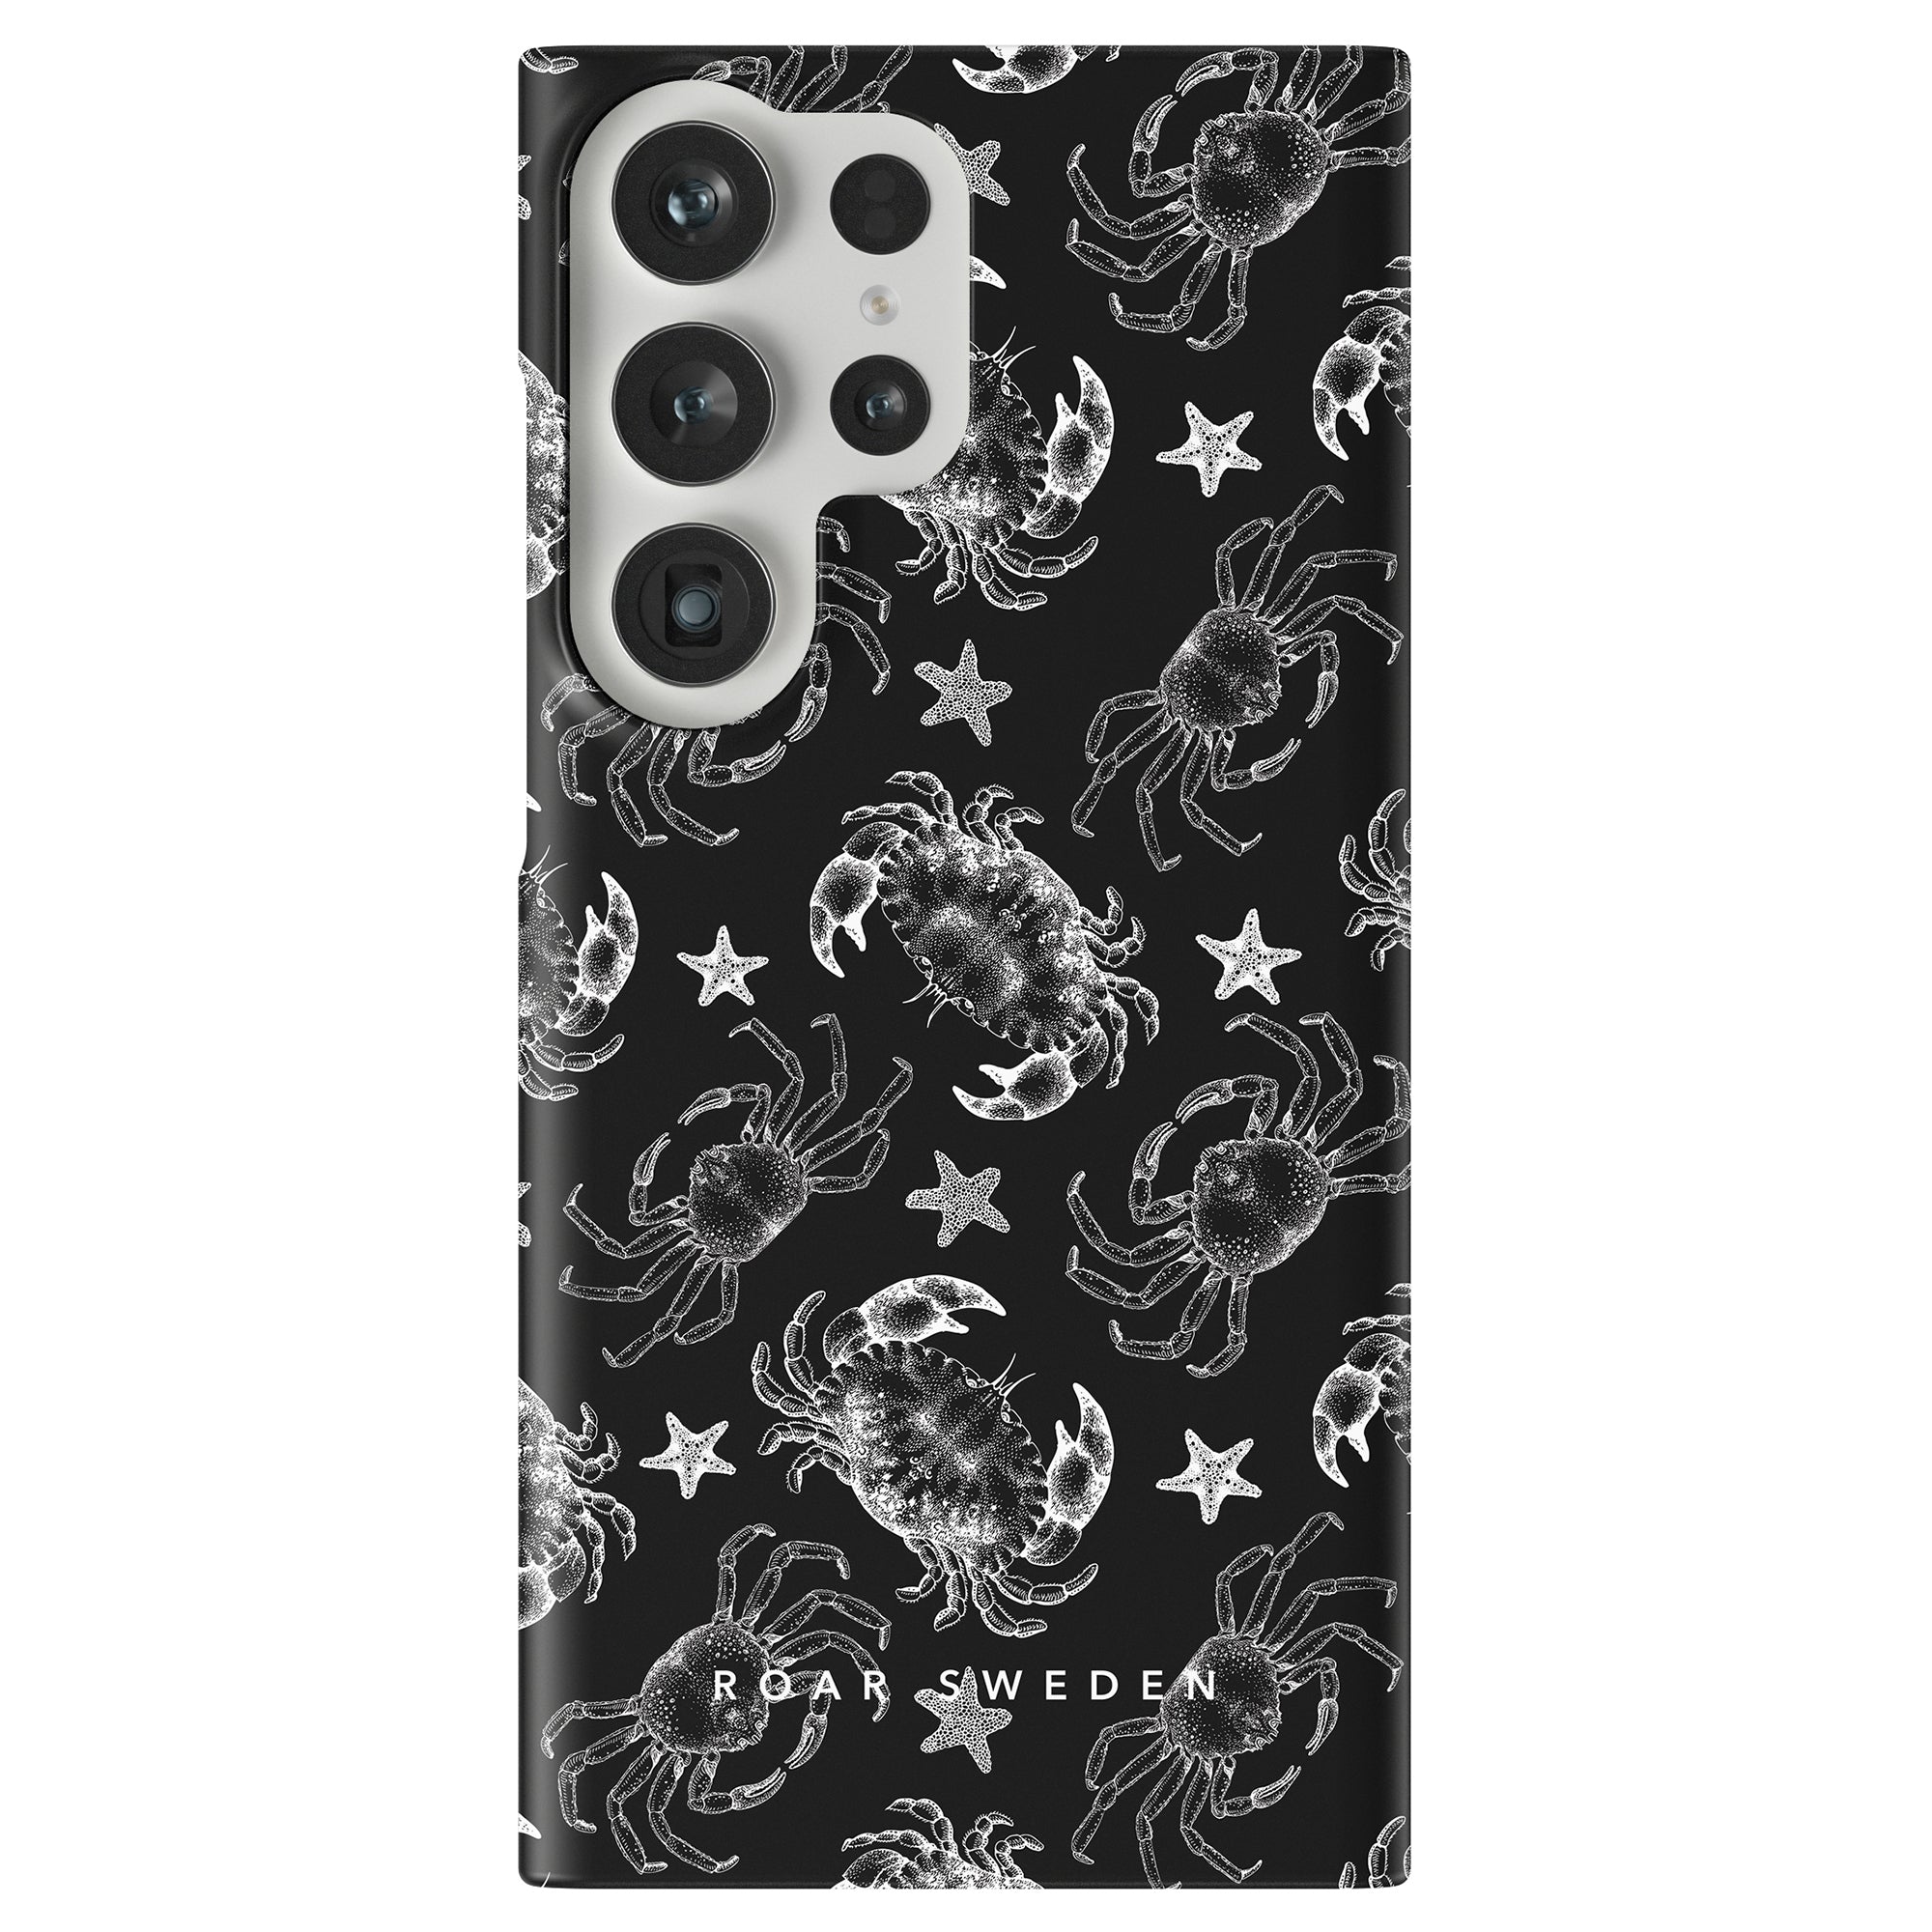 Smartphone case from the Ocean Collection featuring a black background with white illustrations of crabs, lobsters, and starfish, and the text "ROAR SWEDEN" at the bottom. This Black Crab - Slim Case blends marin elegans with coastal charm.